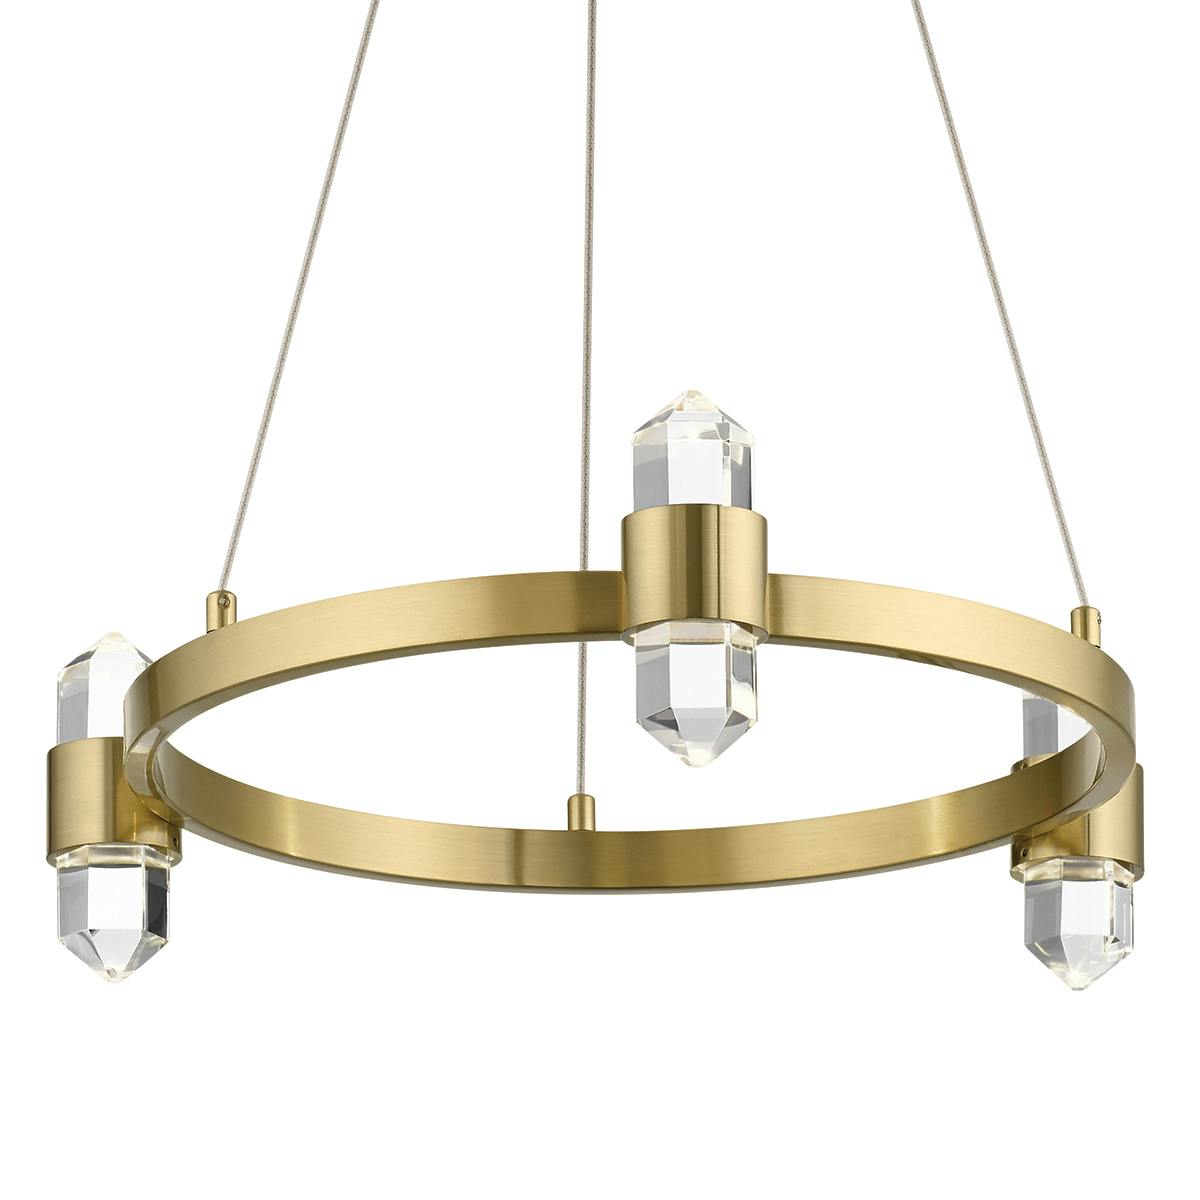 Close up view of the Arabella 3000K LED Chandelier Gold on a white background